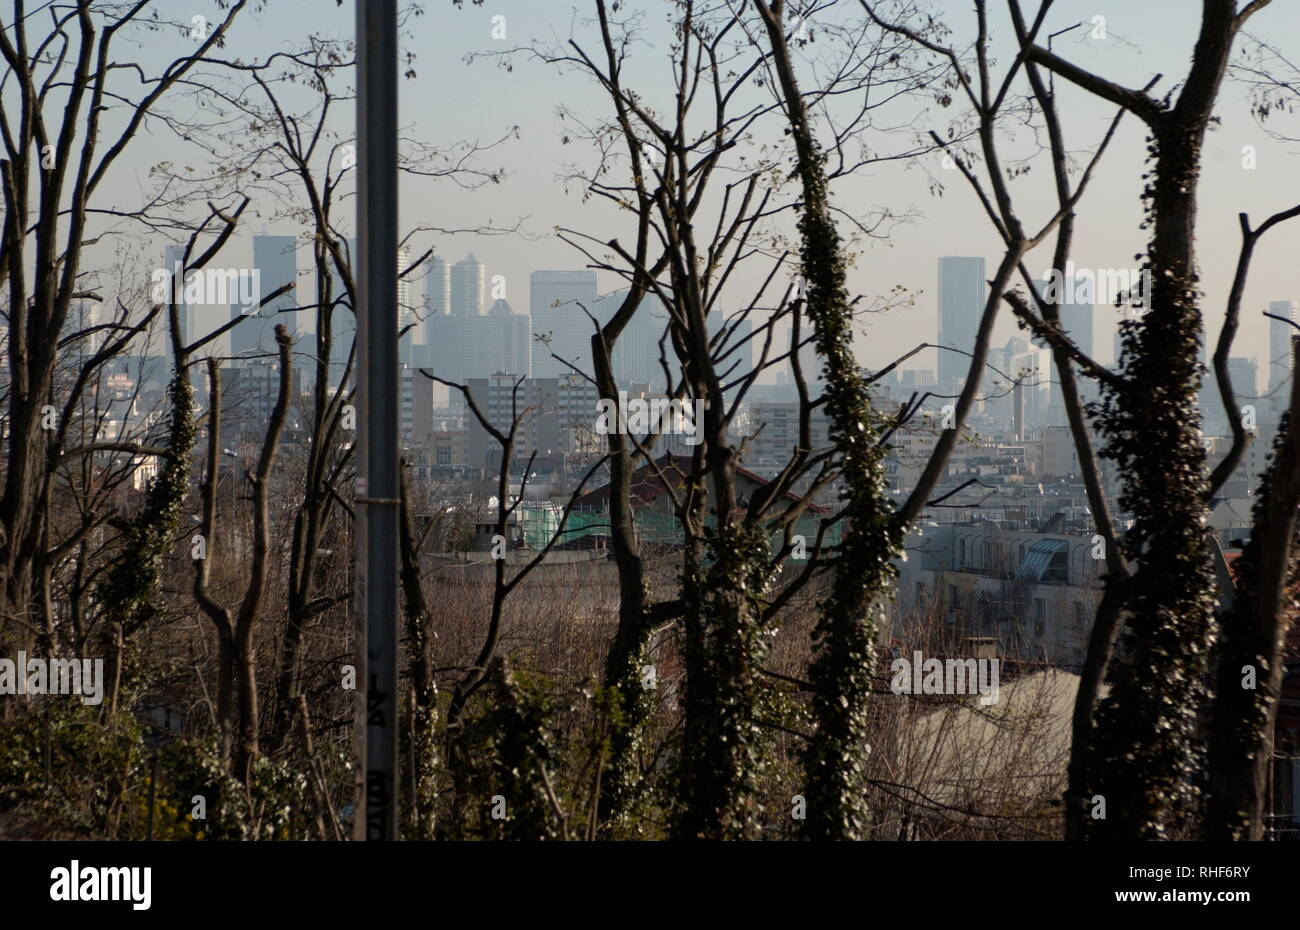 AJAXNETPHOTO. VAL D'OR, FRANCE. - DISTANT TOWERS - BUSINESS DISTRICT OF LA DEFENSE, PARIS, SEEN FROM THE SUBURBS NEAR VAL D'OR.  PHOTO:JONATHAN EASTLAND/AJAX REF: D60604 945 Stock Photo